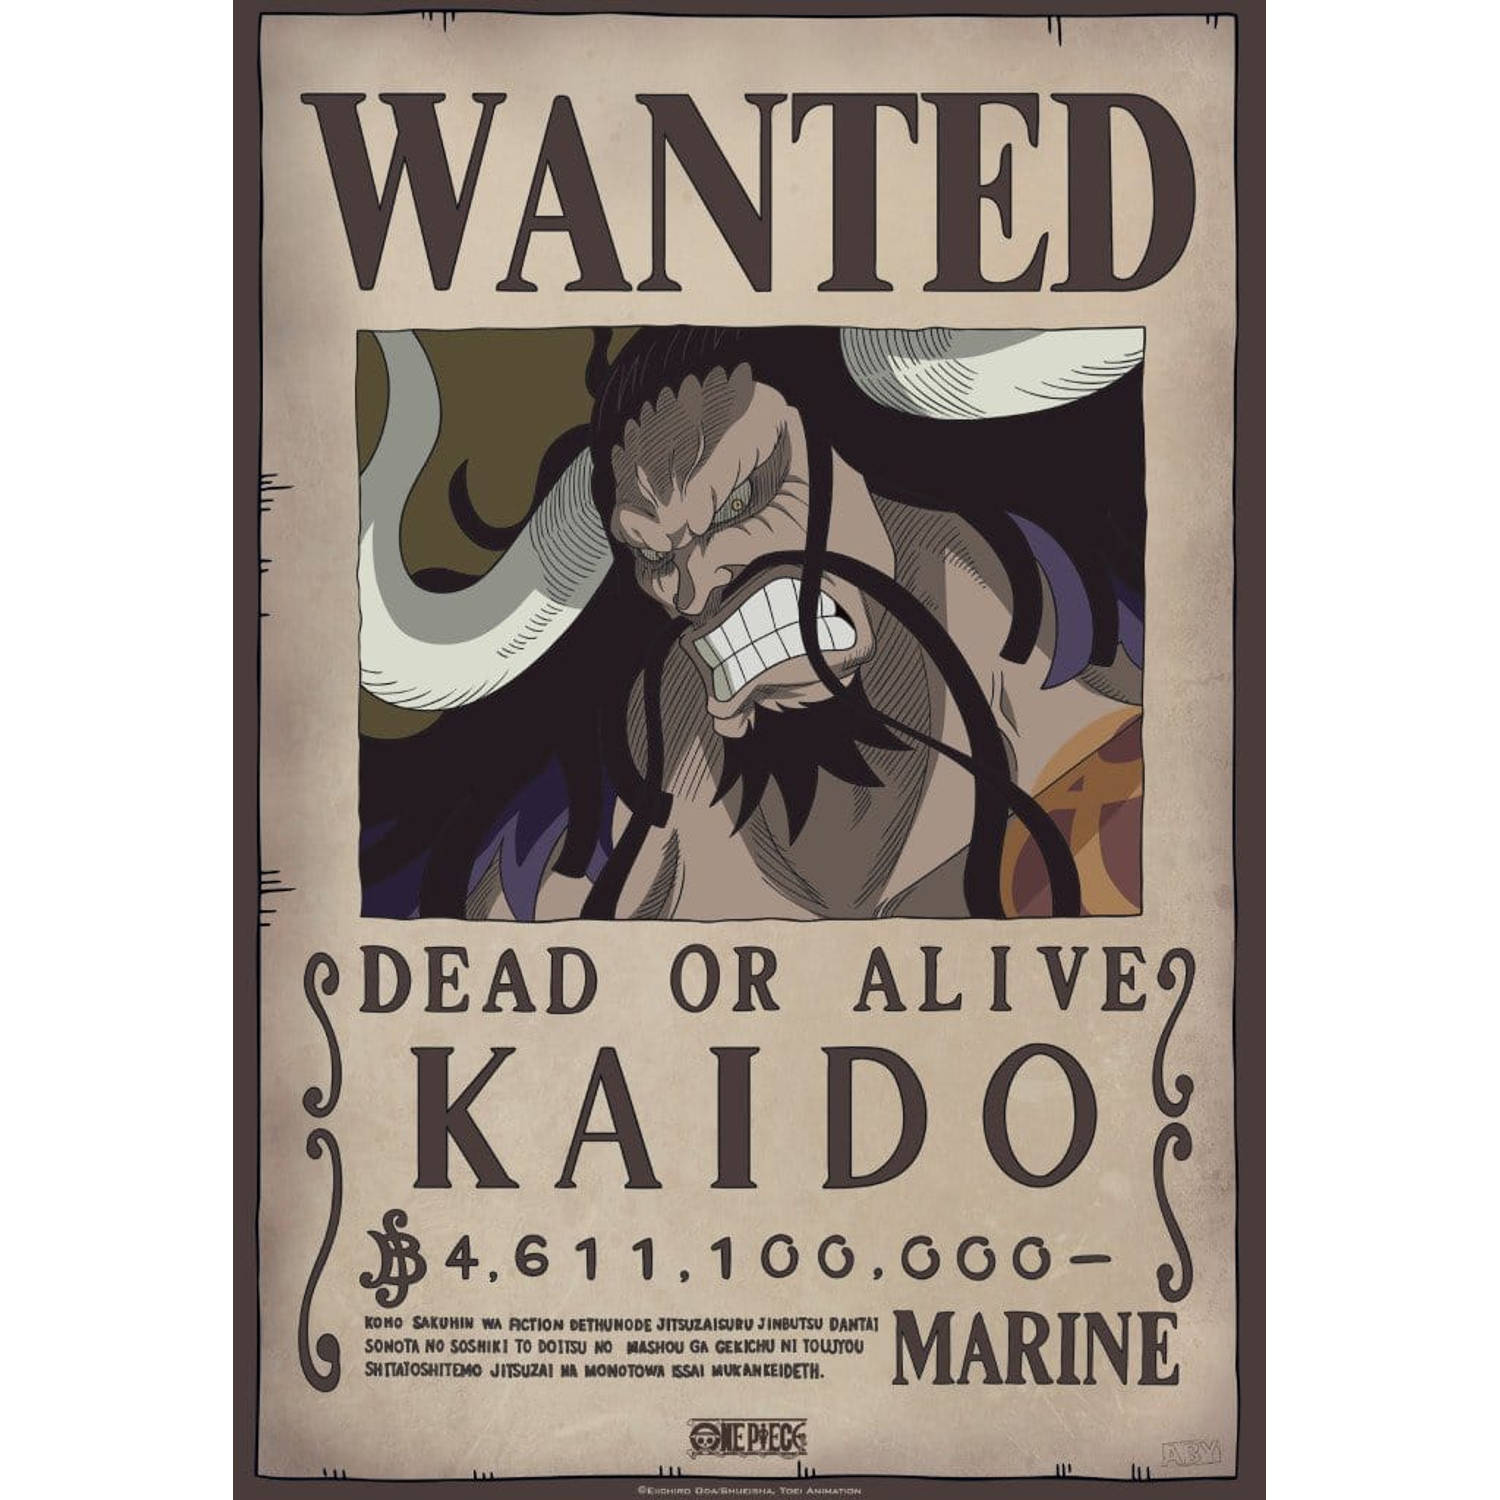 Abystyle One Piece Wanted Kaido Poster 35x52cm